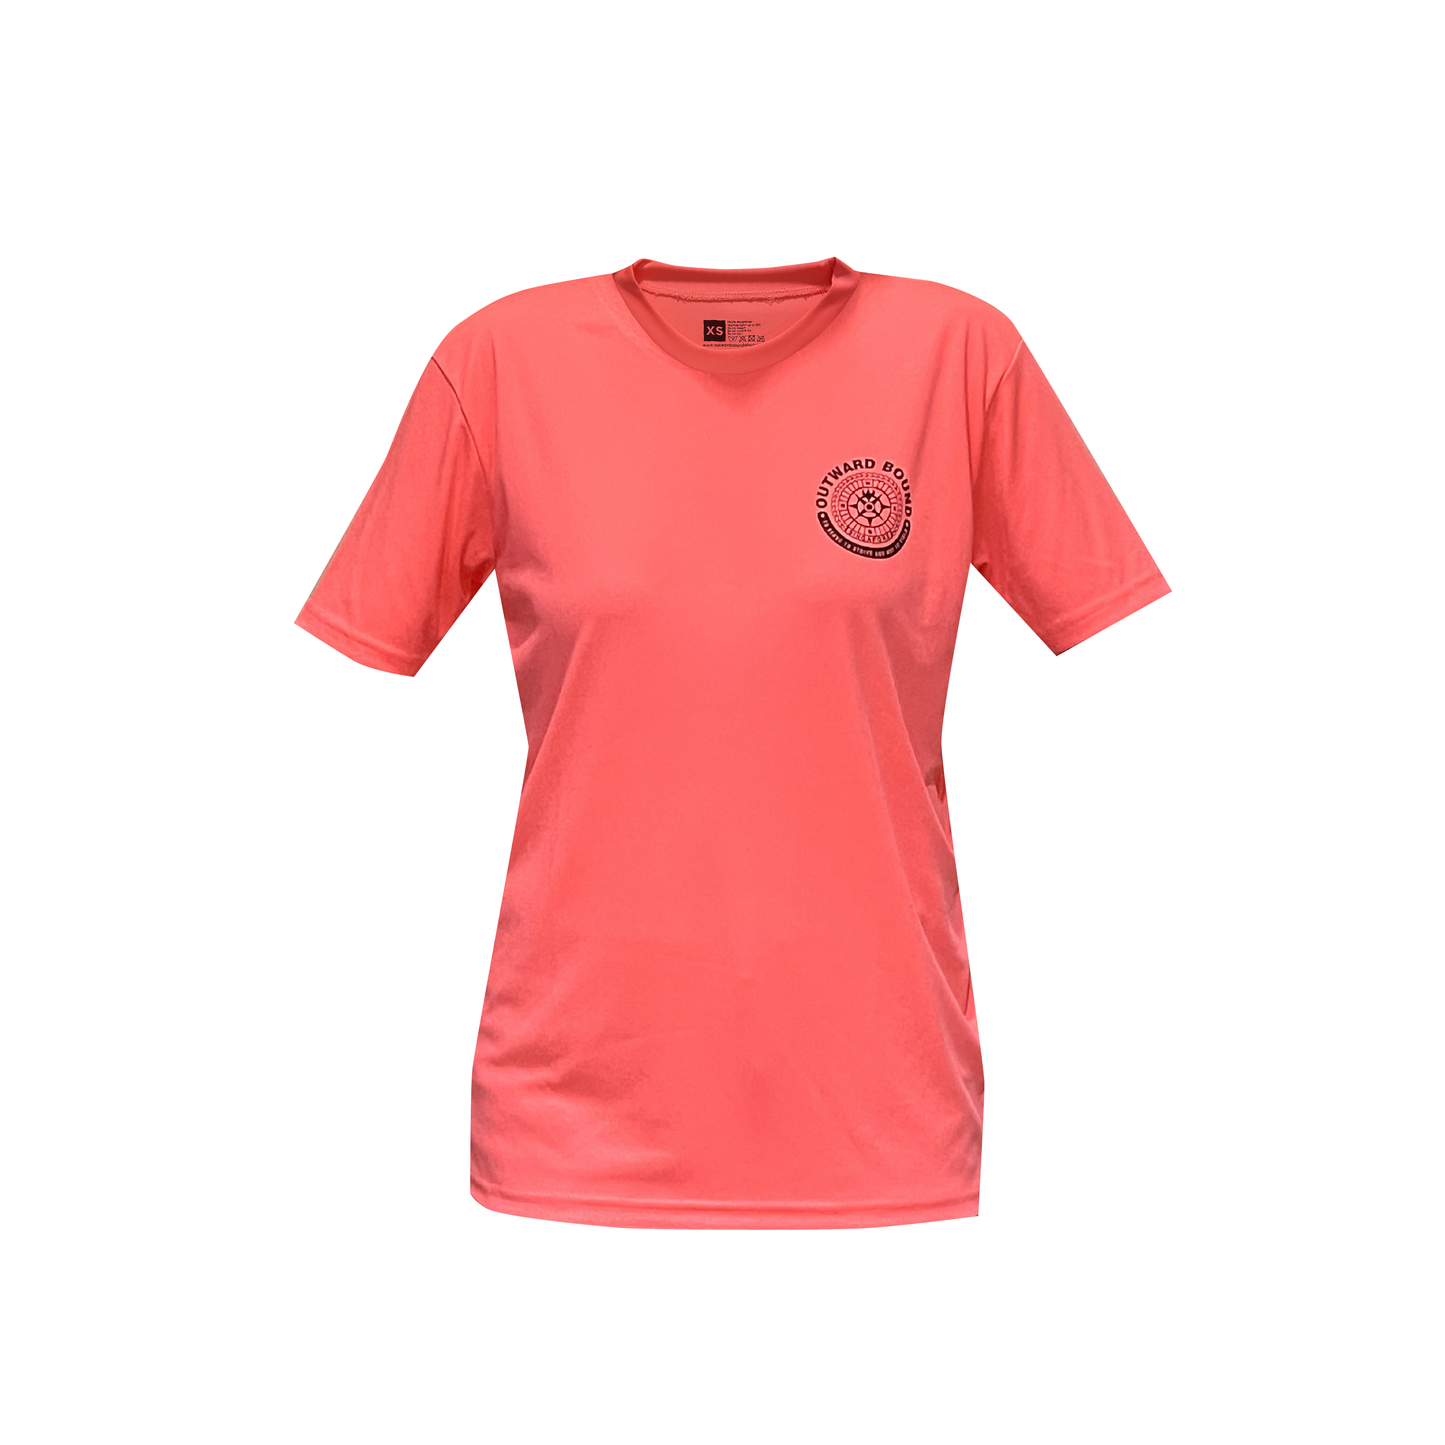 Neon Pink Classic Tee – Outward Bound Shop